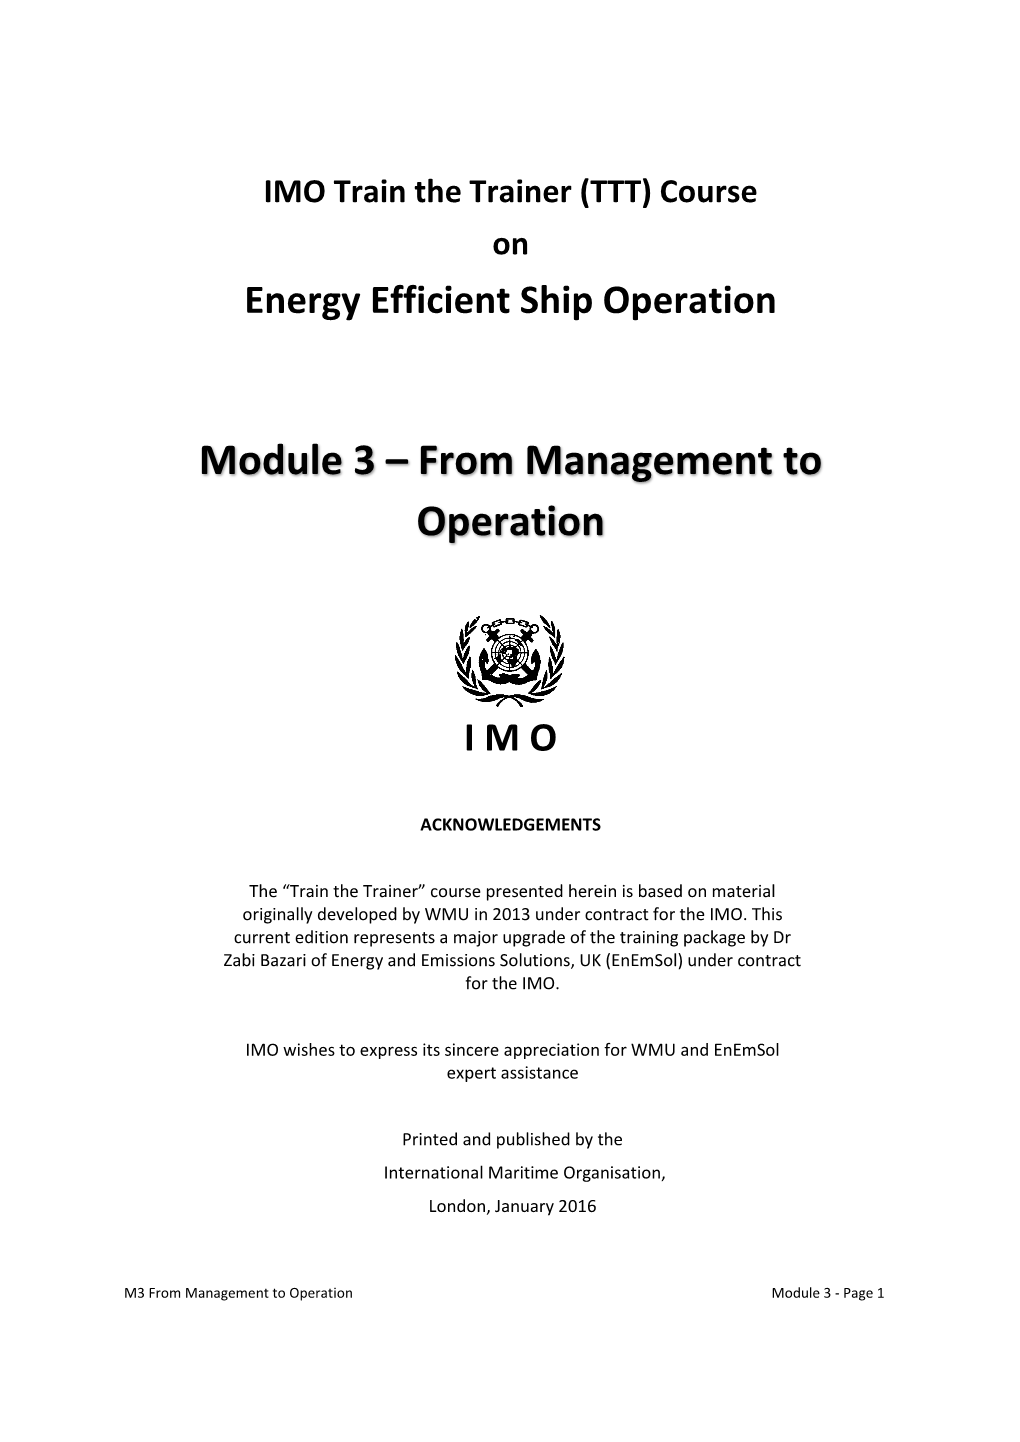 Module 3 – from Management to Operation